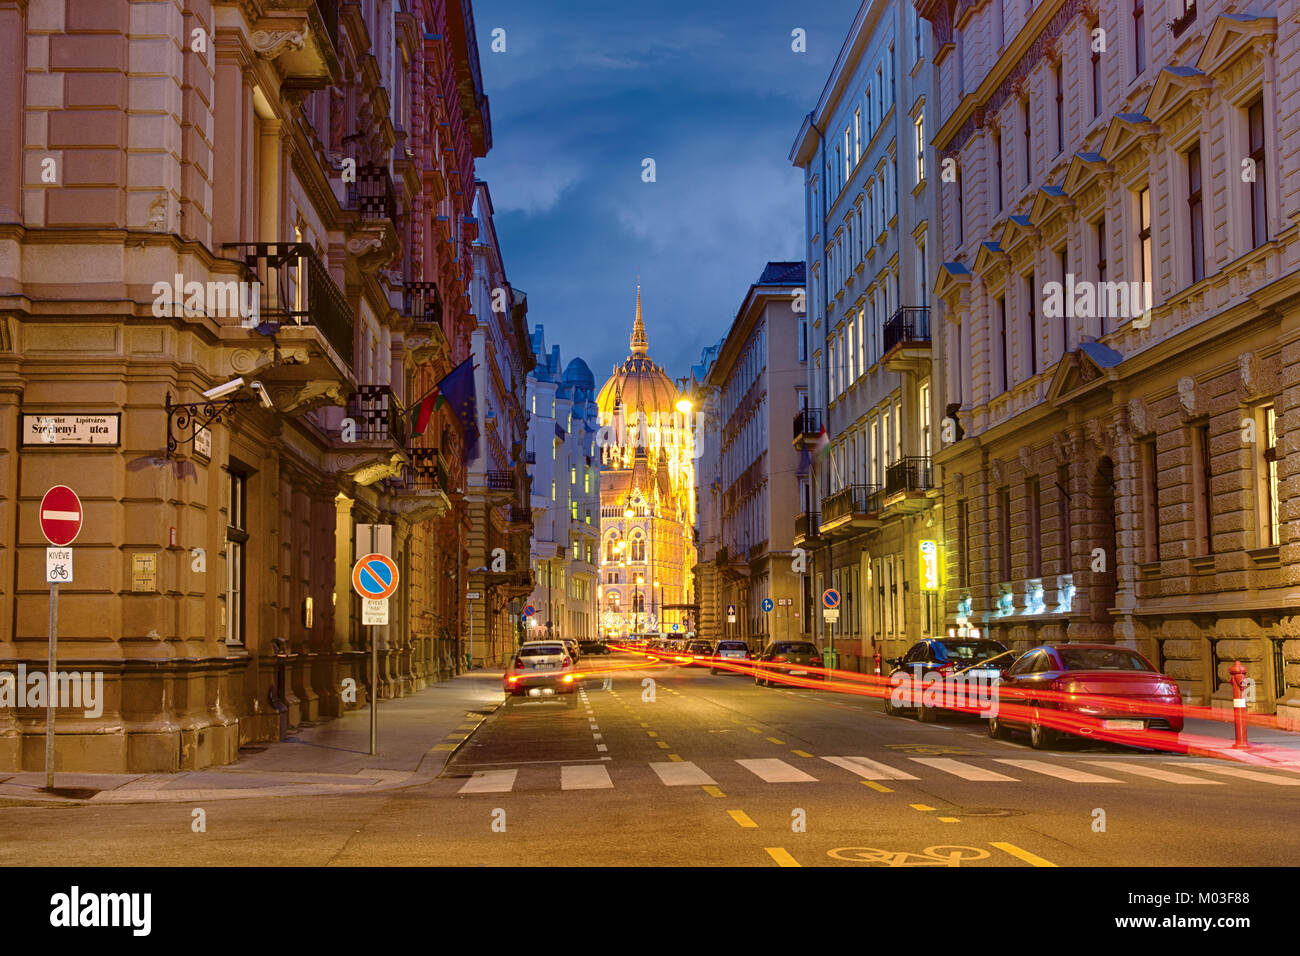 Akadémia street in Budapest, highlighted Parliament building at the end of the street Stock Photo